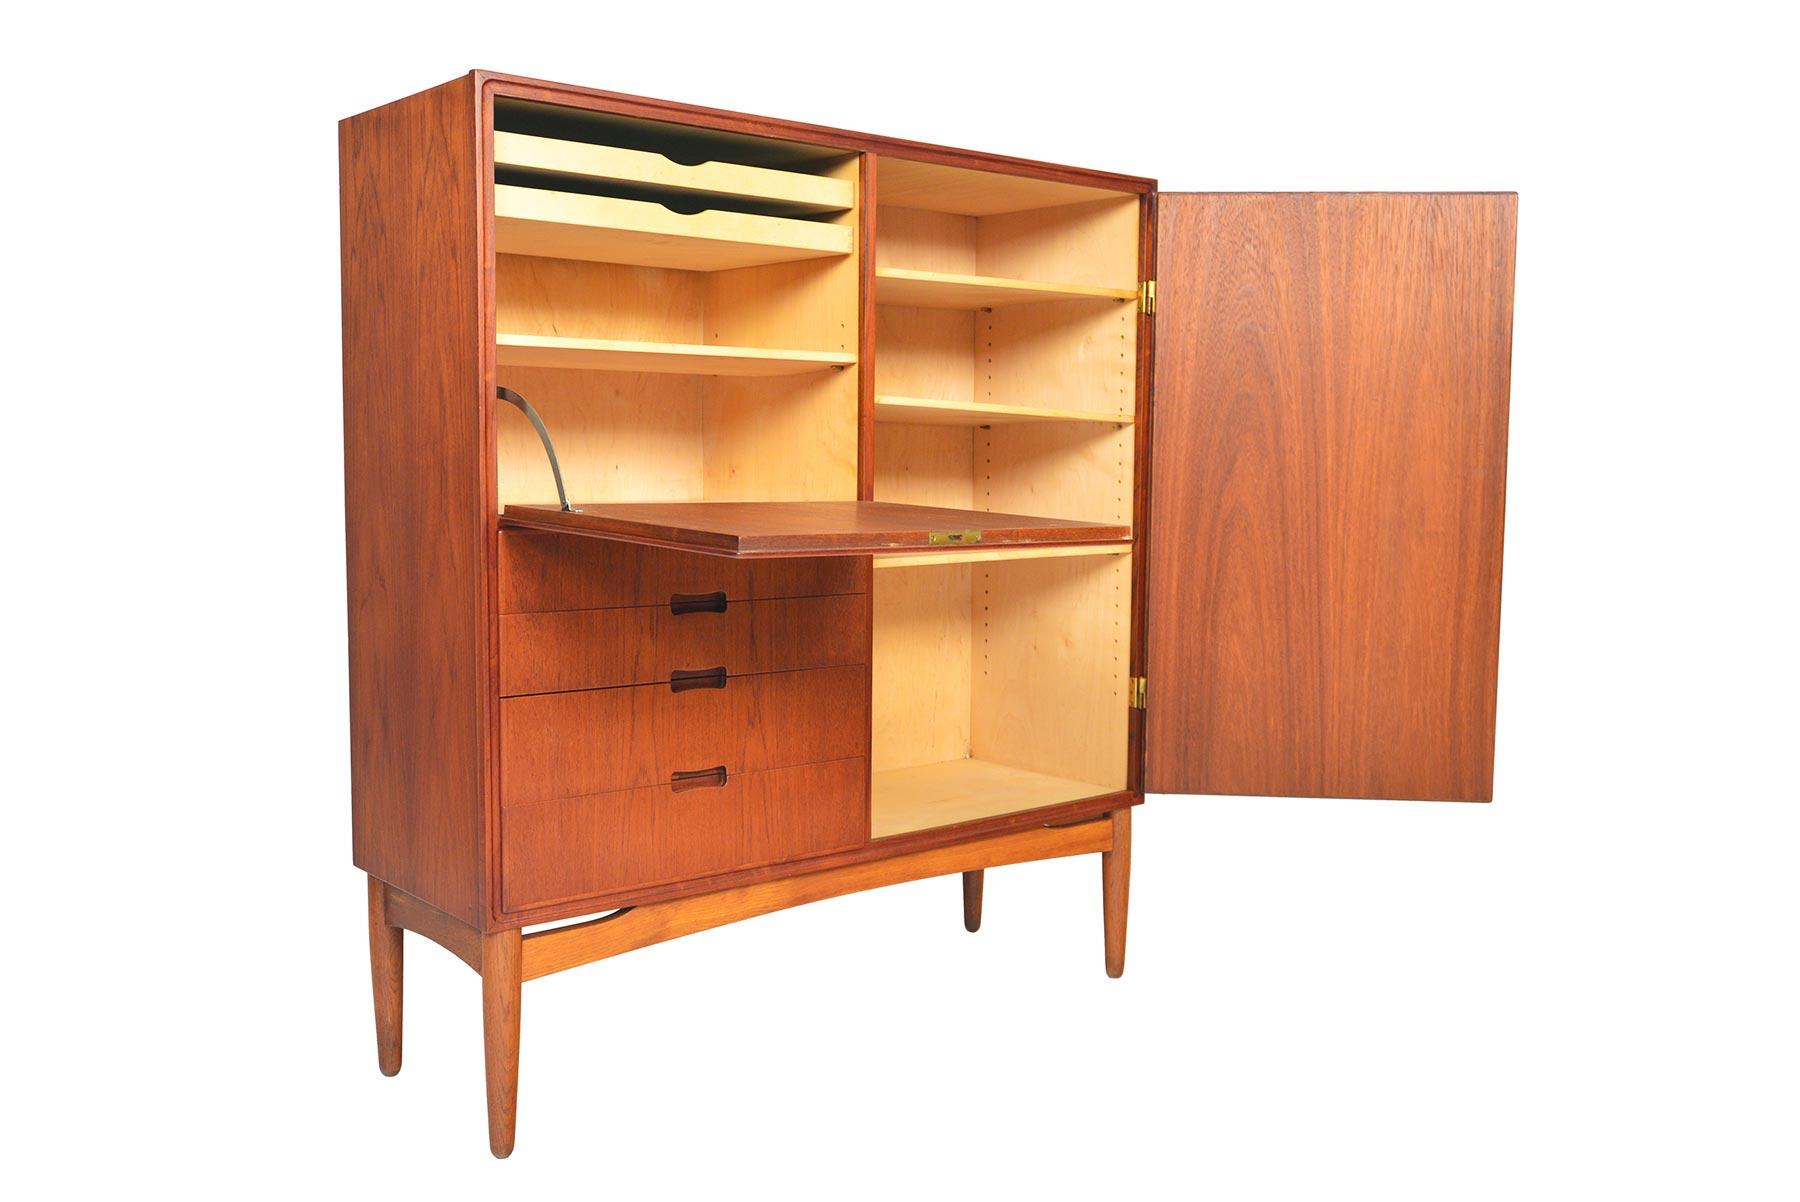 This tall Danish modern cupboard offers exceptional storage and design details. The left door is accessed by key and drops to reveal two drawers and adjustable shelving. A tall cabinet sits to the right of the case and is outfitted with adjustable